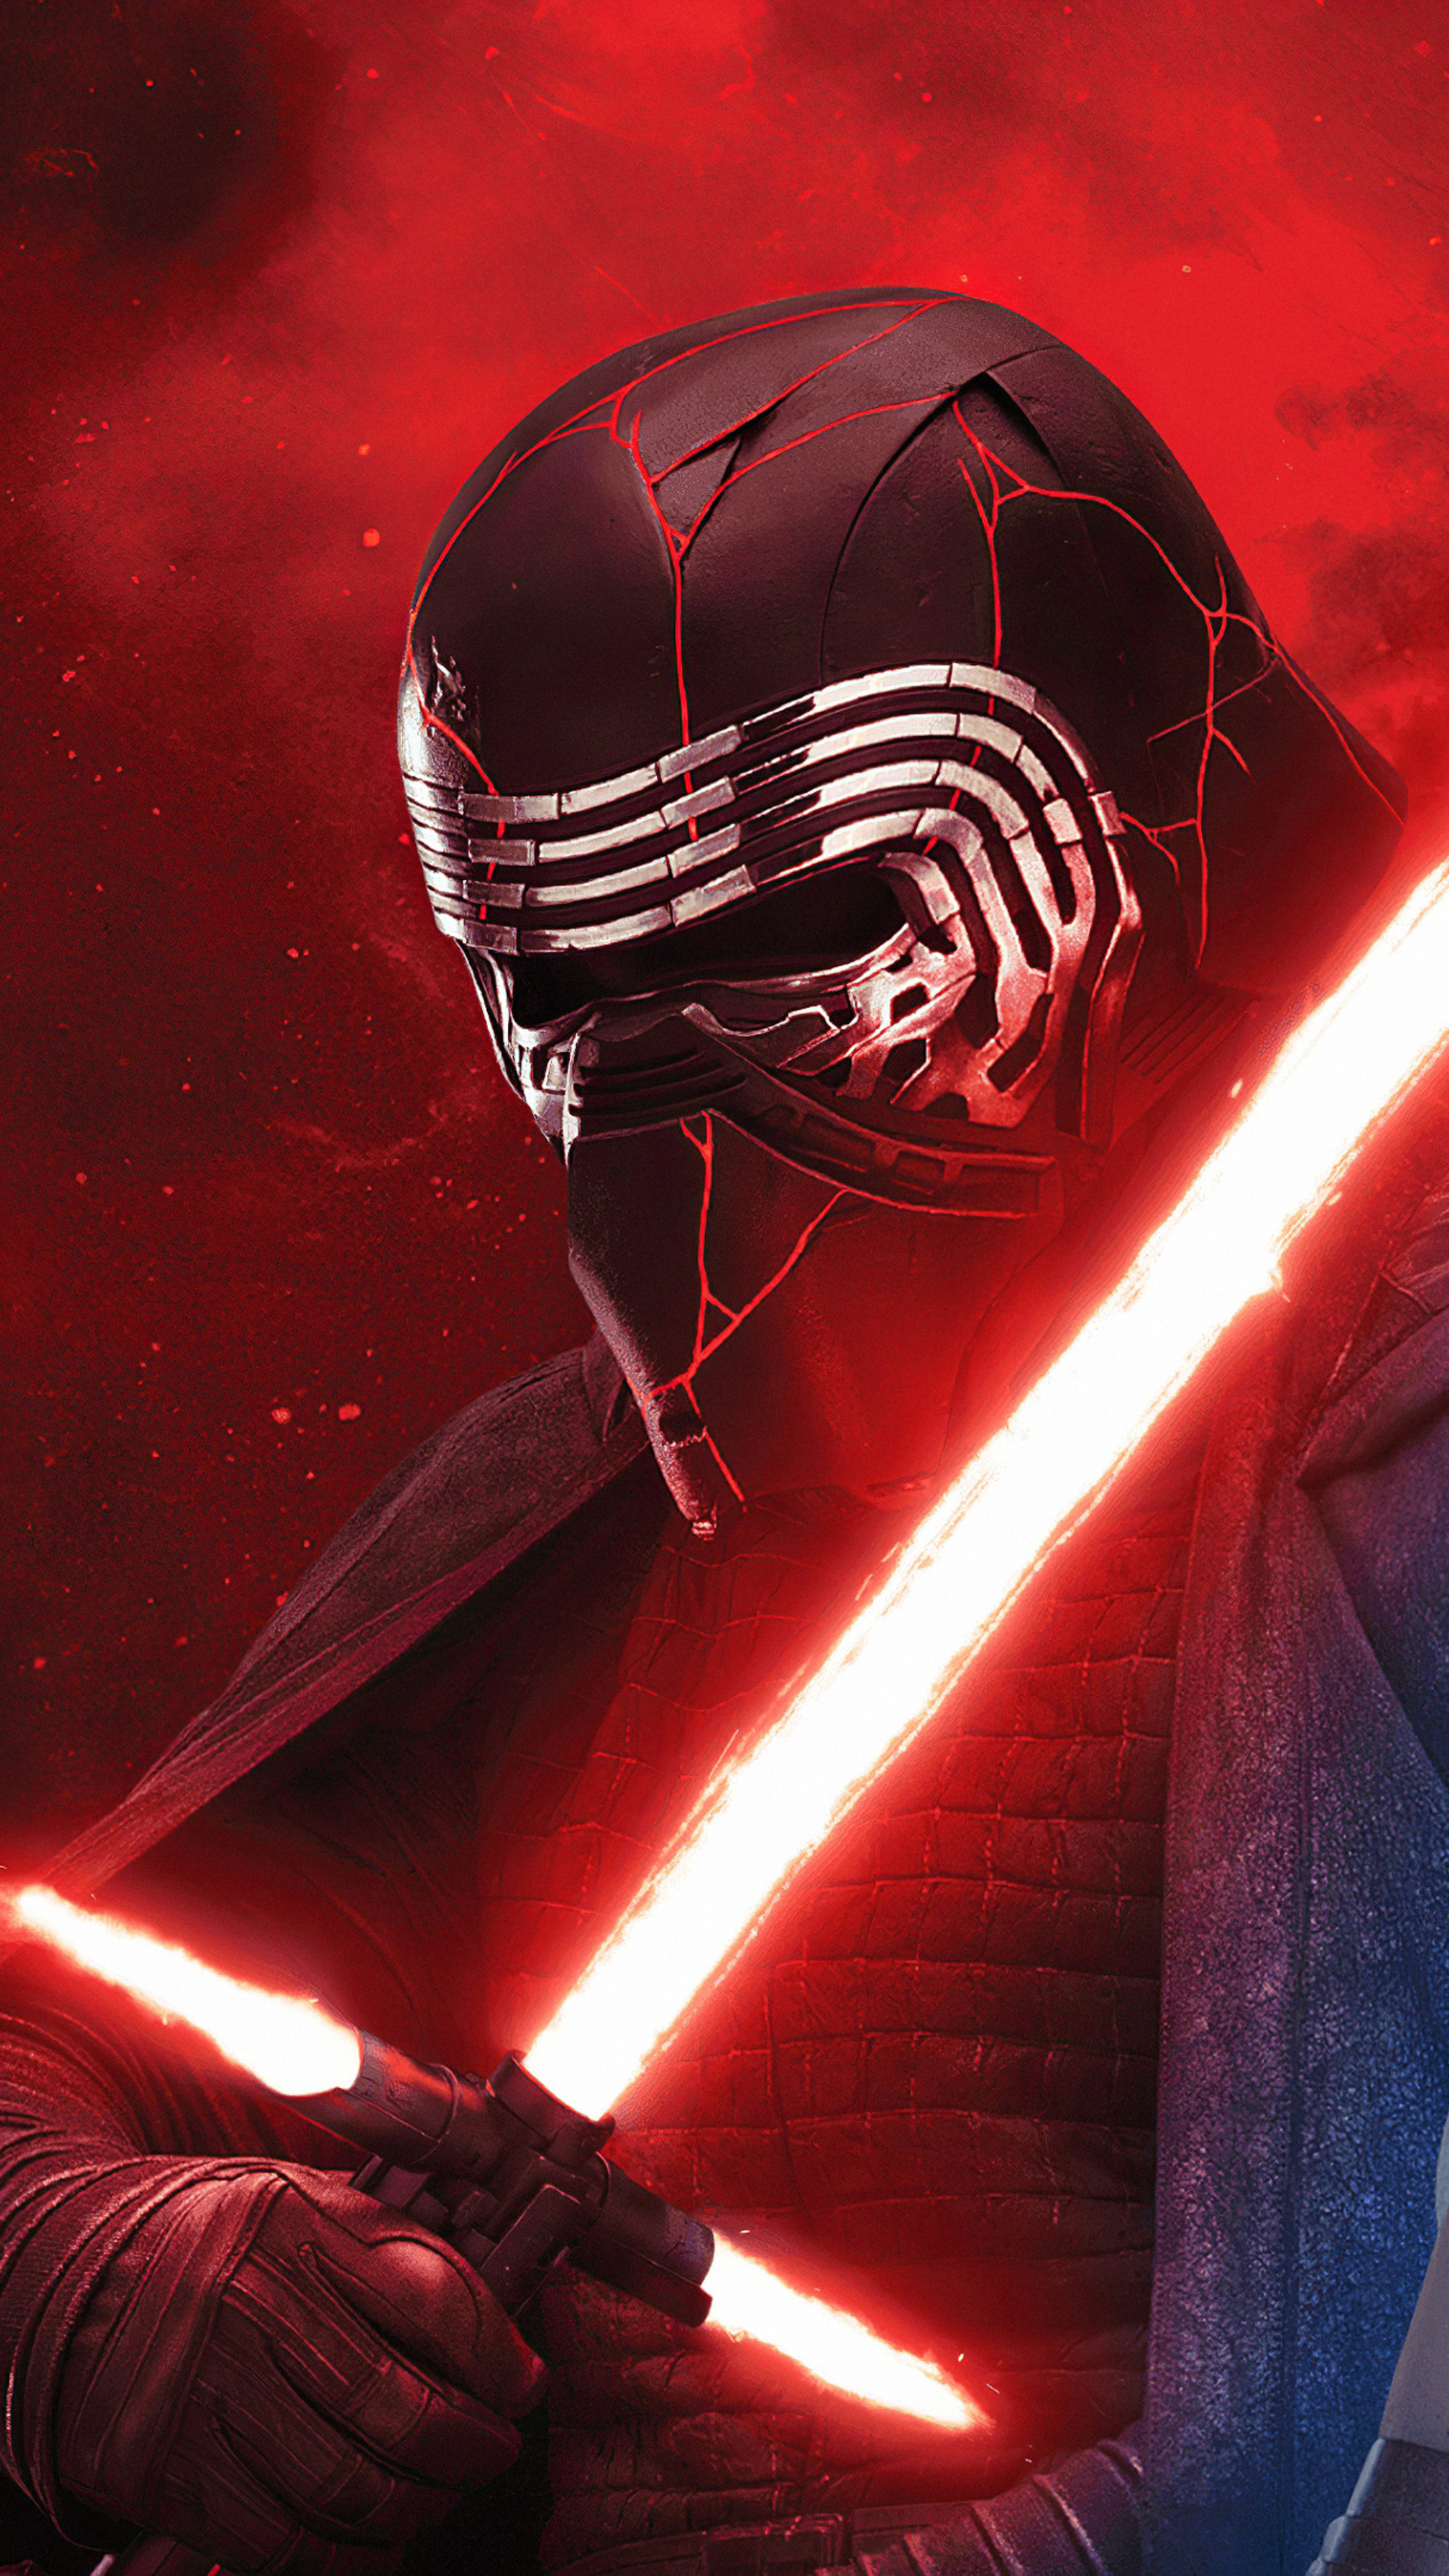 Star Wars: The Rise Of Skywalker: Ben Solo, Kylo Ren, the son of Leia Organa and Han Solo. 2160x3840 4K Wallpaper.